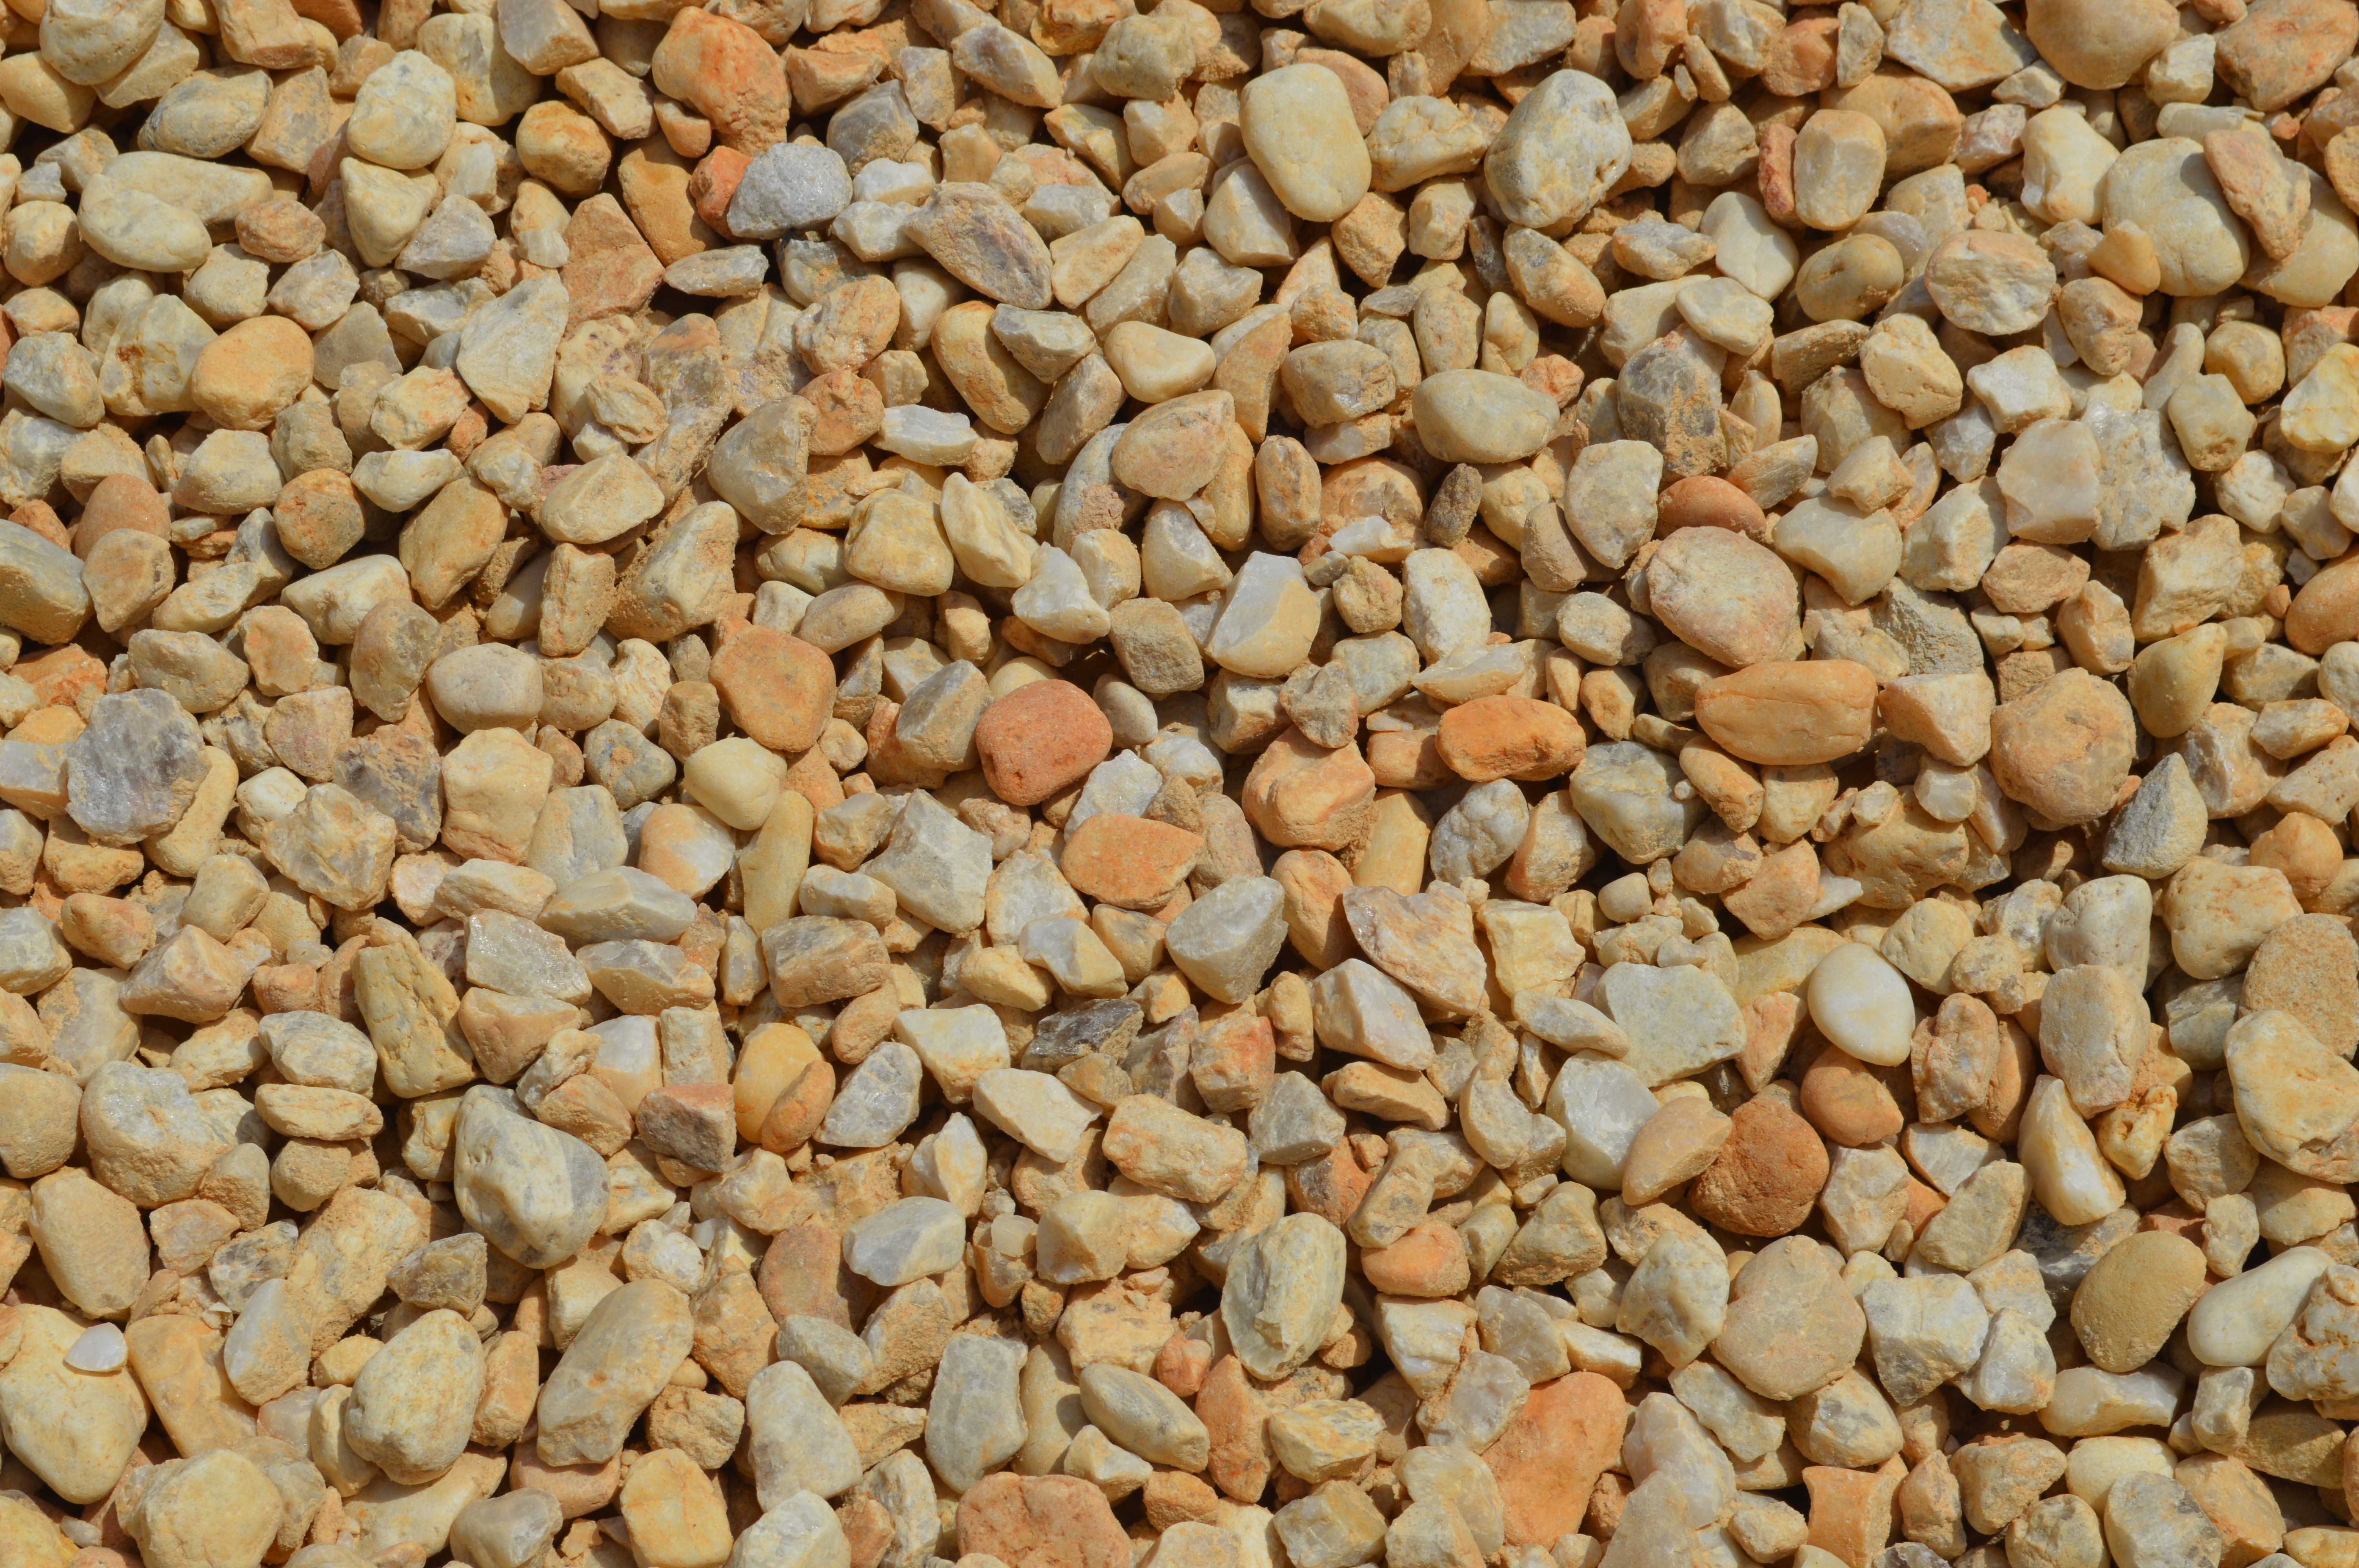 Red Lava Rock Pebbles - Bagged Stone - Bagged Products - Landscaping